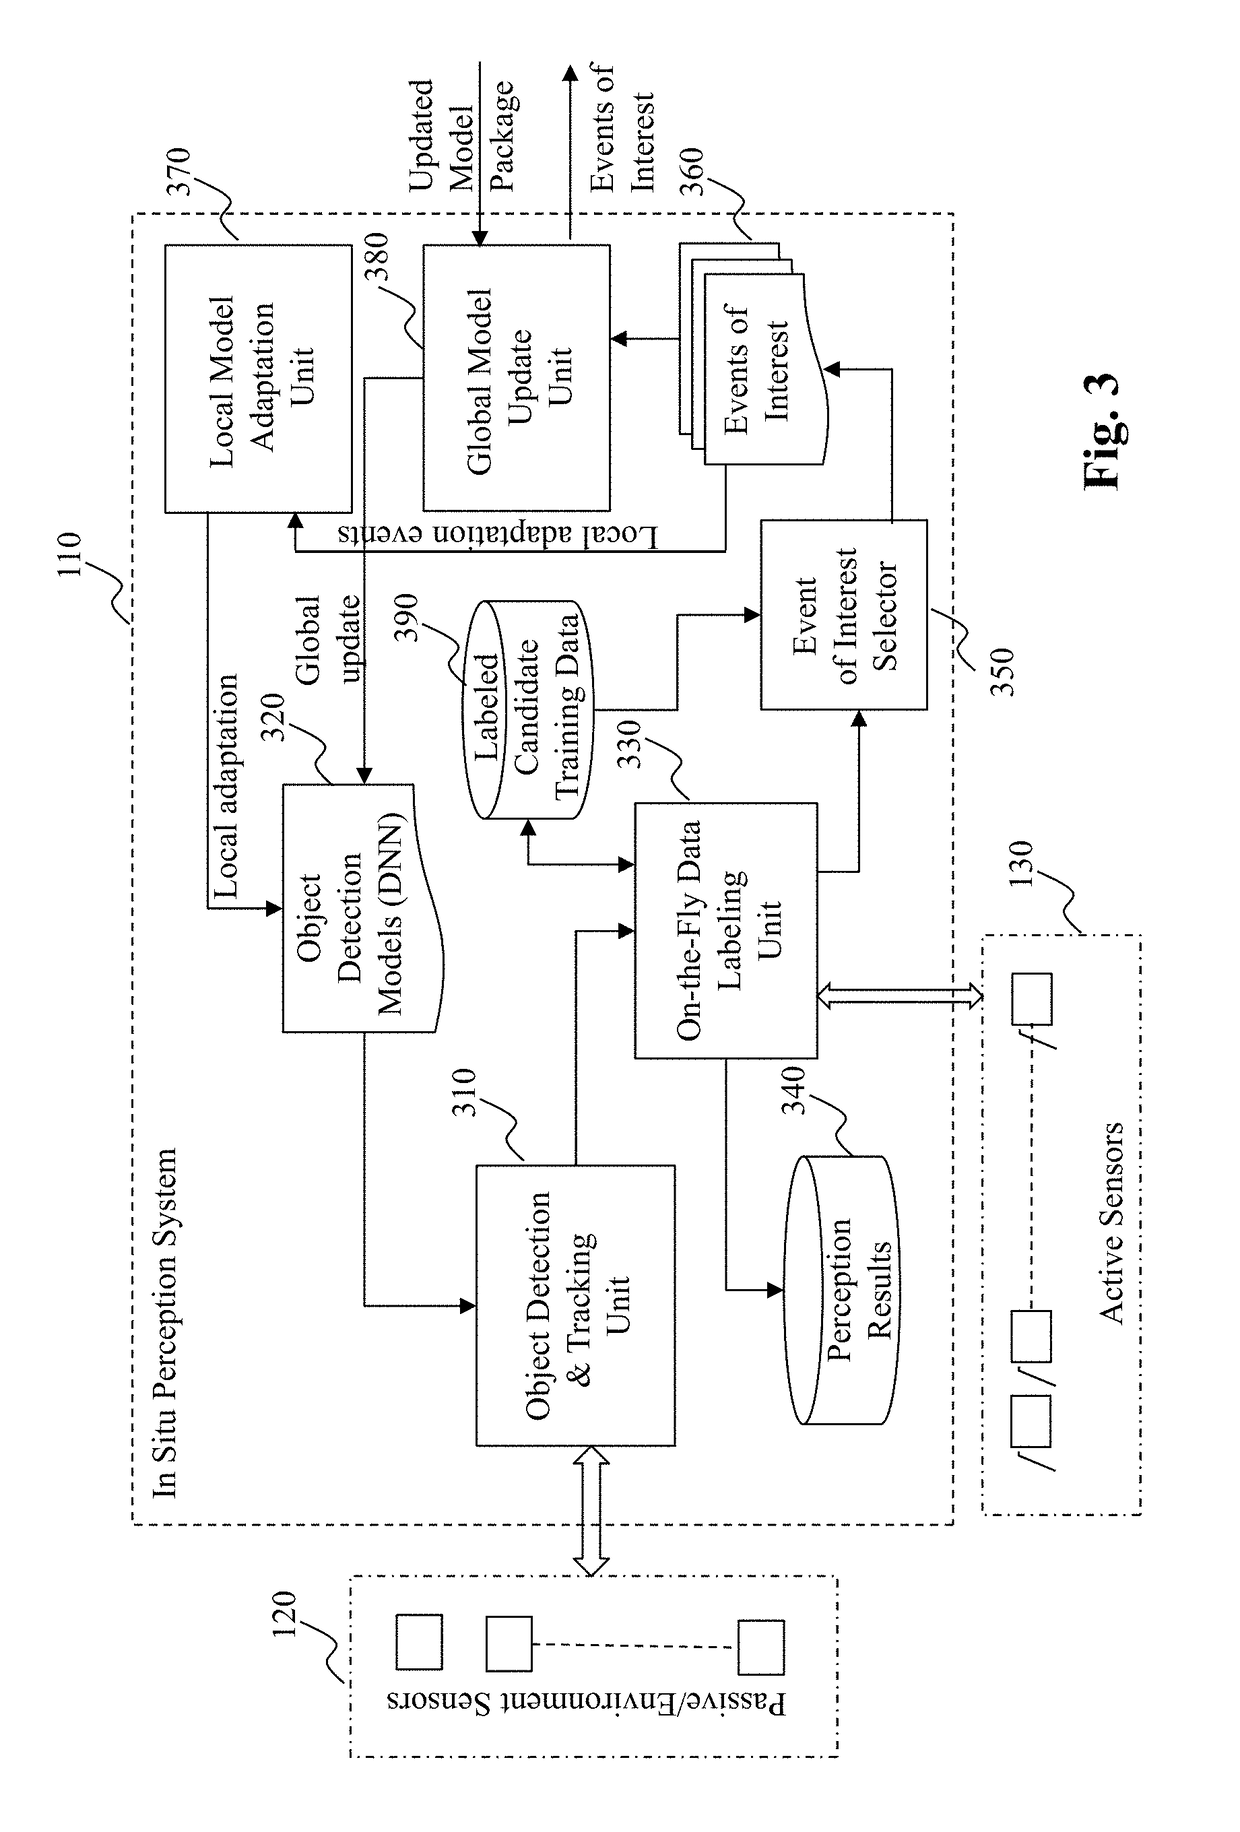 Method and system for object centric stereo via cross modality validation in autonomous driving vehicles